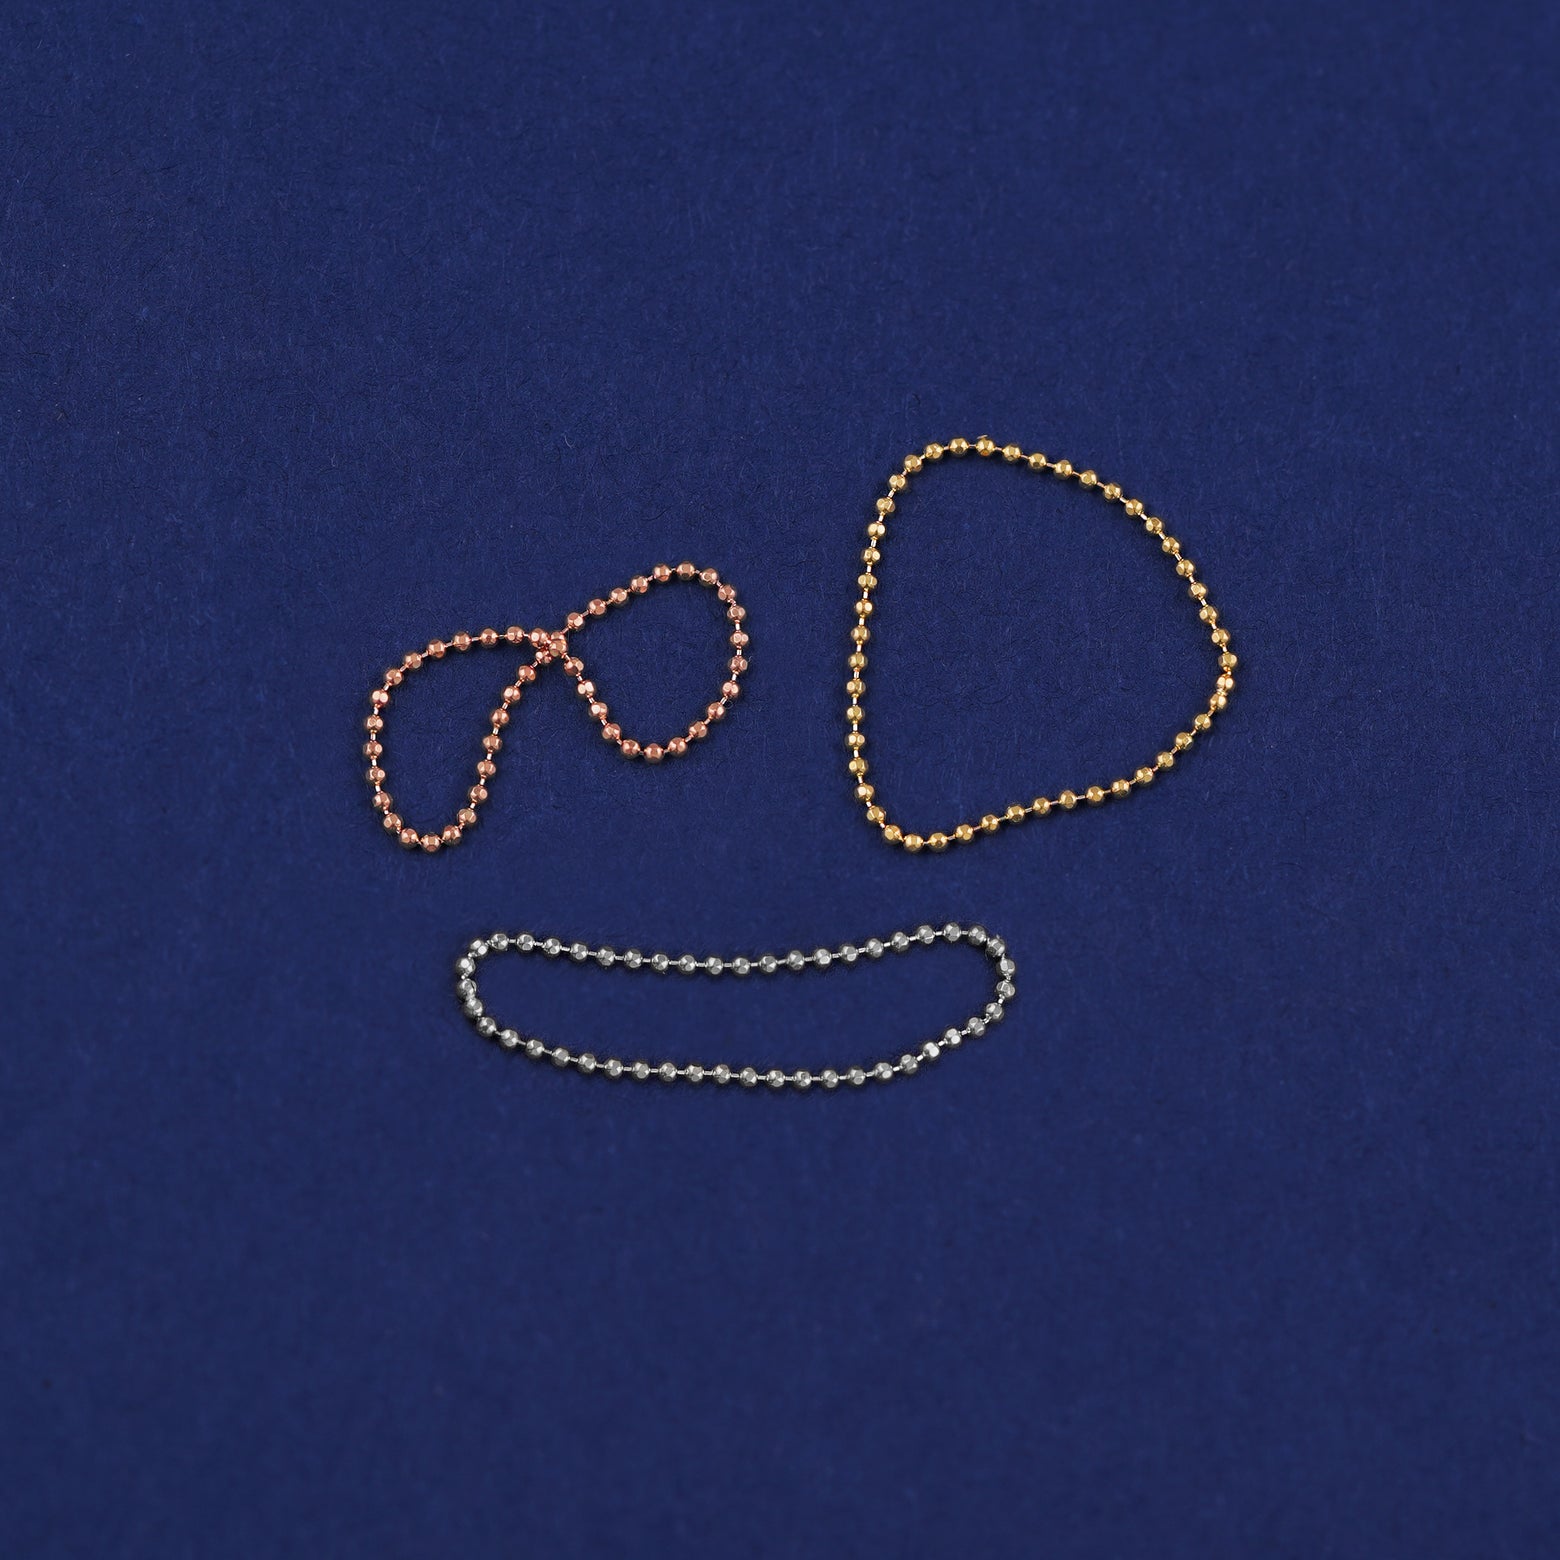 Three versions of the Bead Chain Ring shown in options of yellow, white, and rose gold